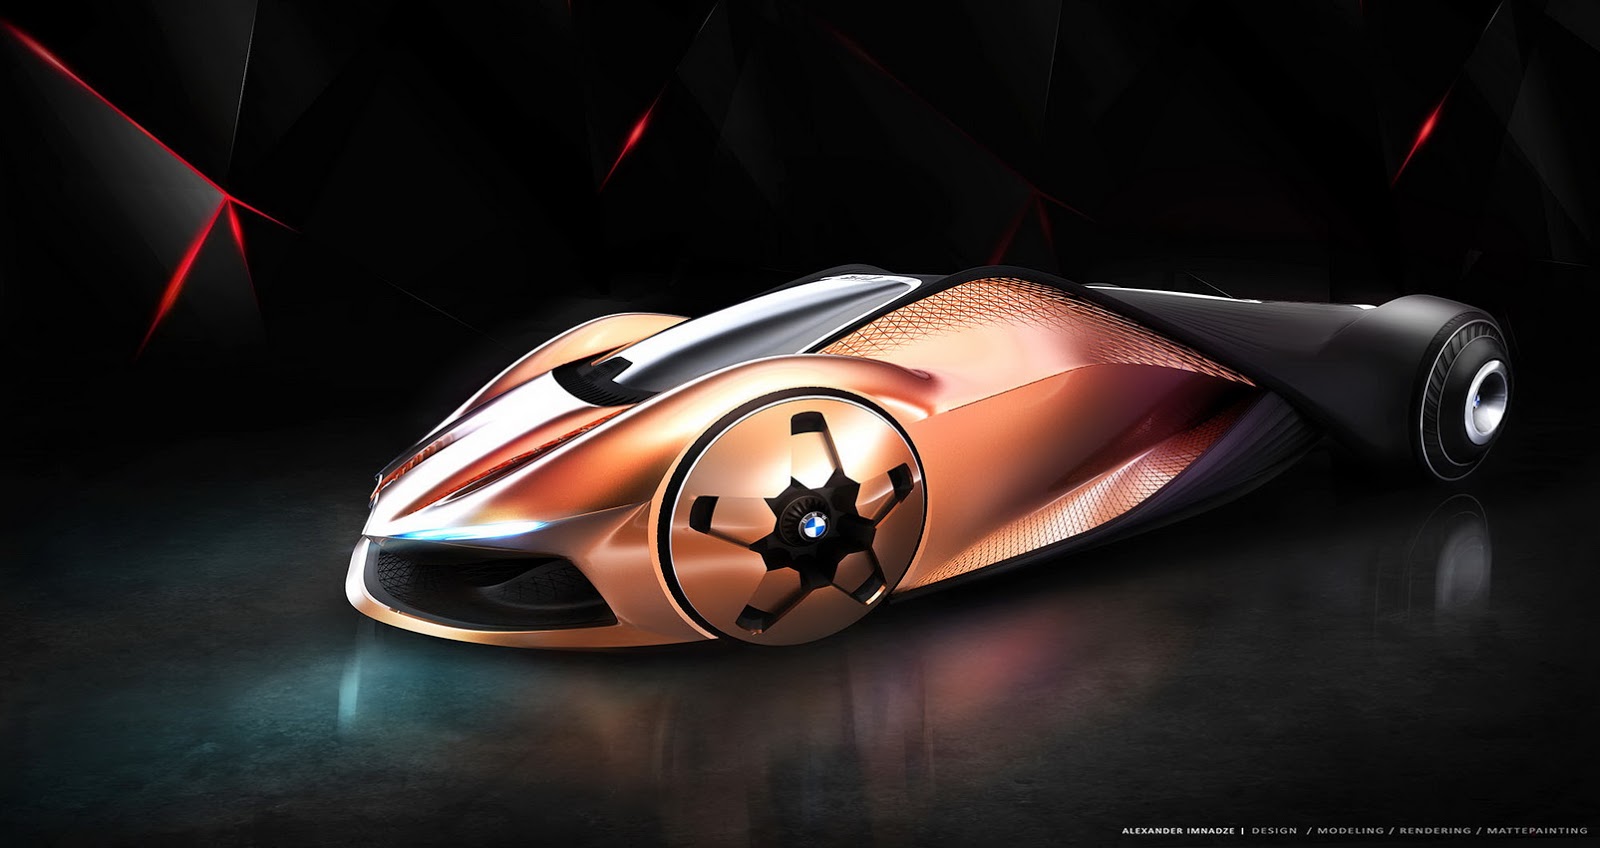 BMW M1 Shark Concept Sketched with Extreme Futuristic Design